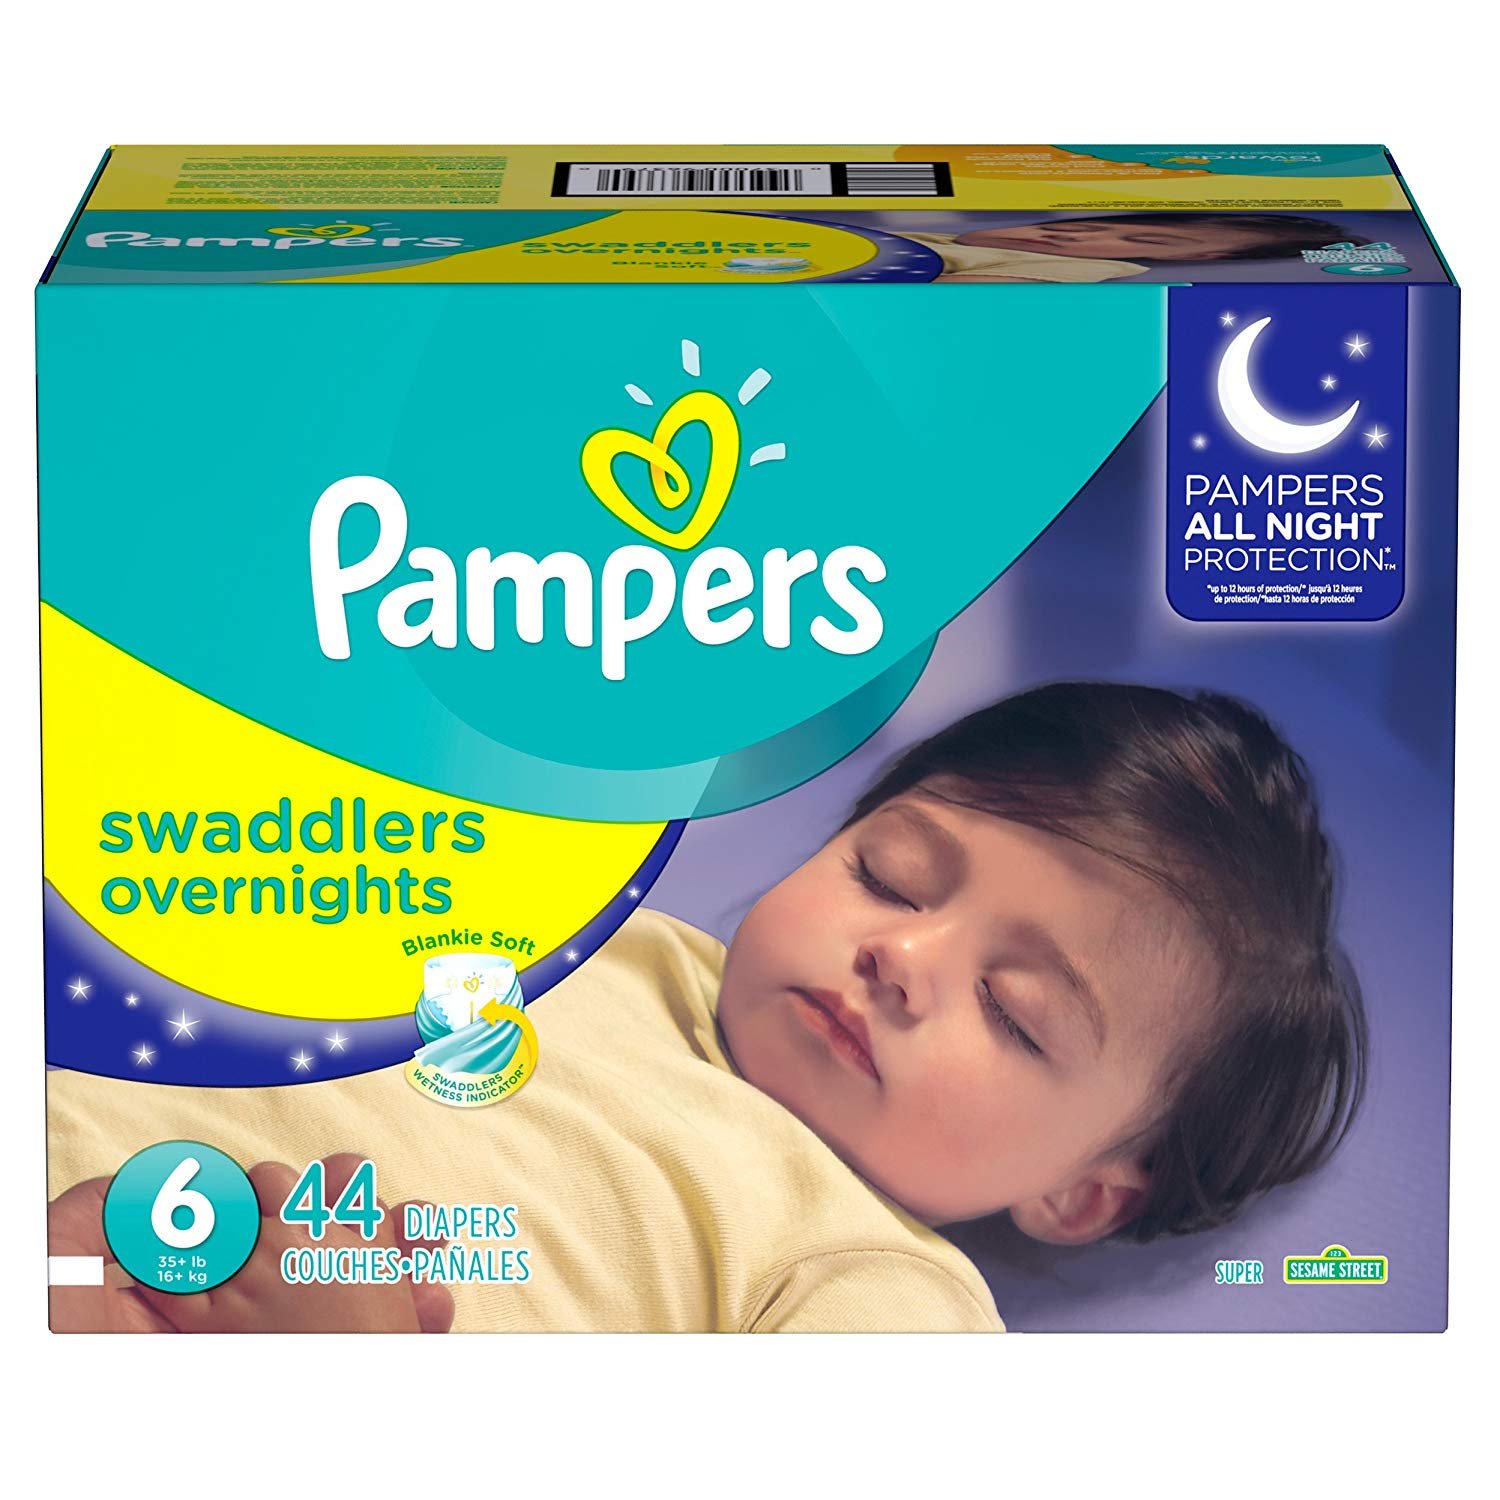 12 Best Overnight Diapers 2023 & Reusable Overnight Diapers 2